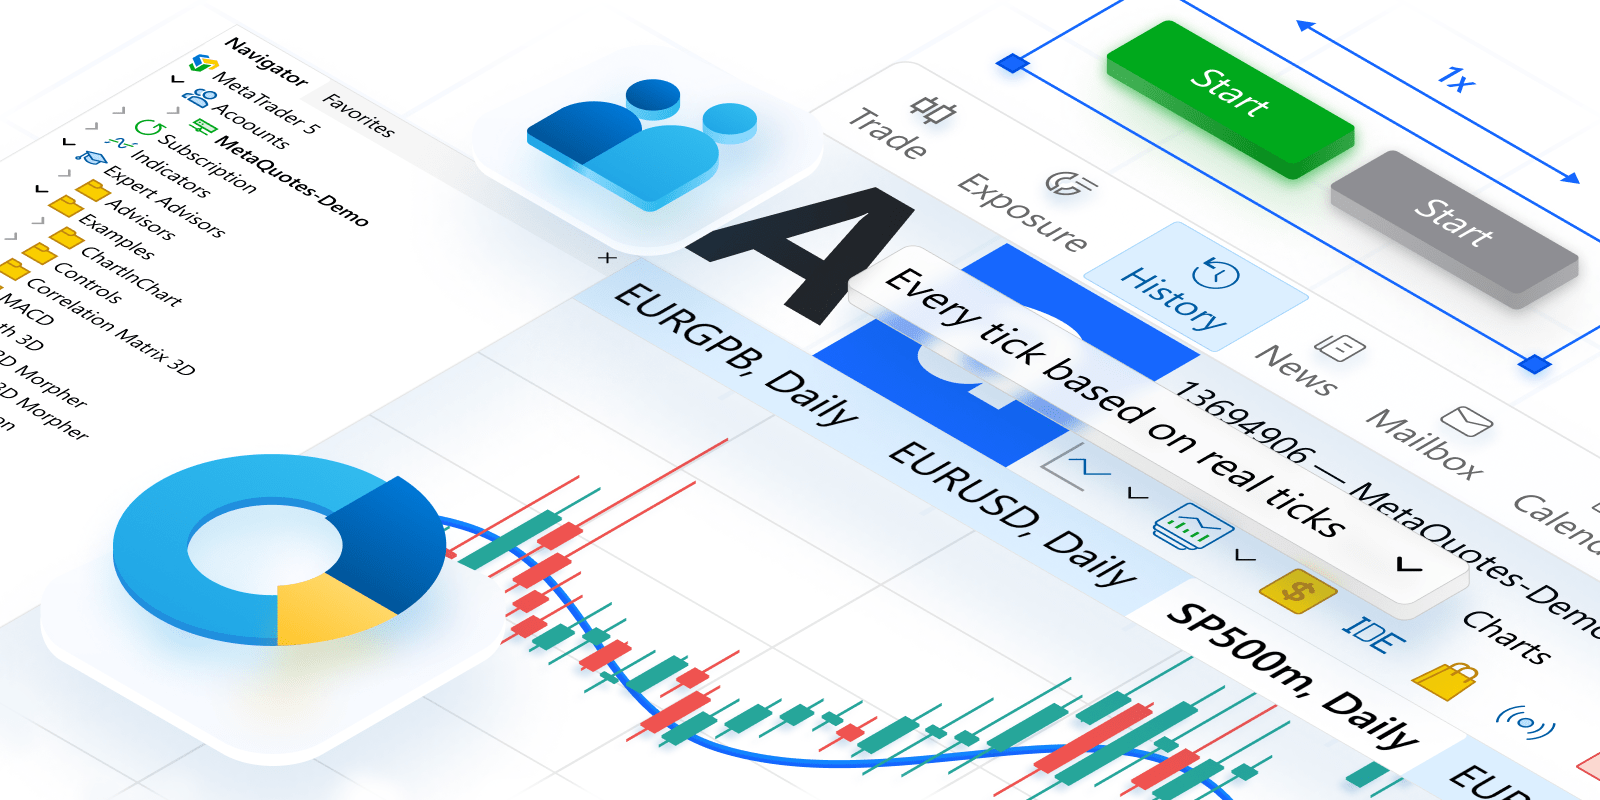 MetaTrader 5 features trading analytics and integrated payments